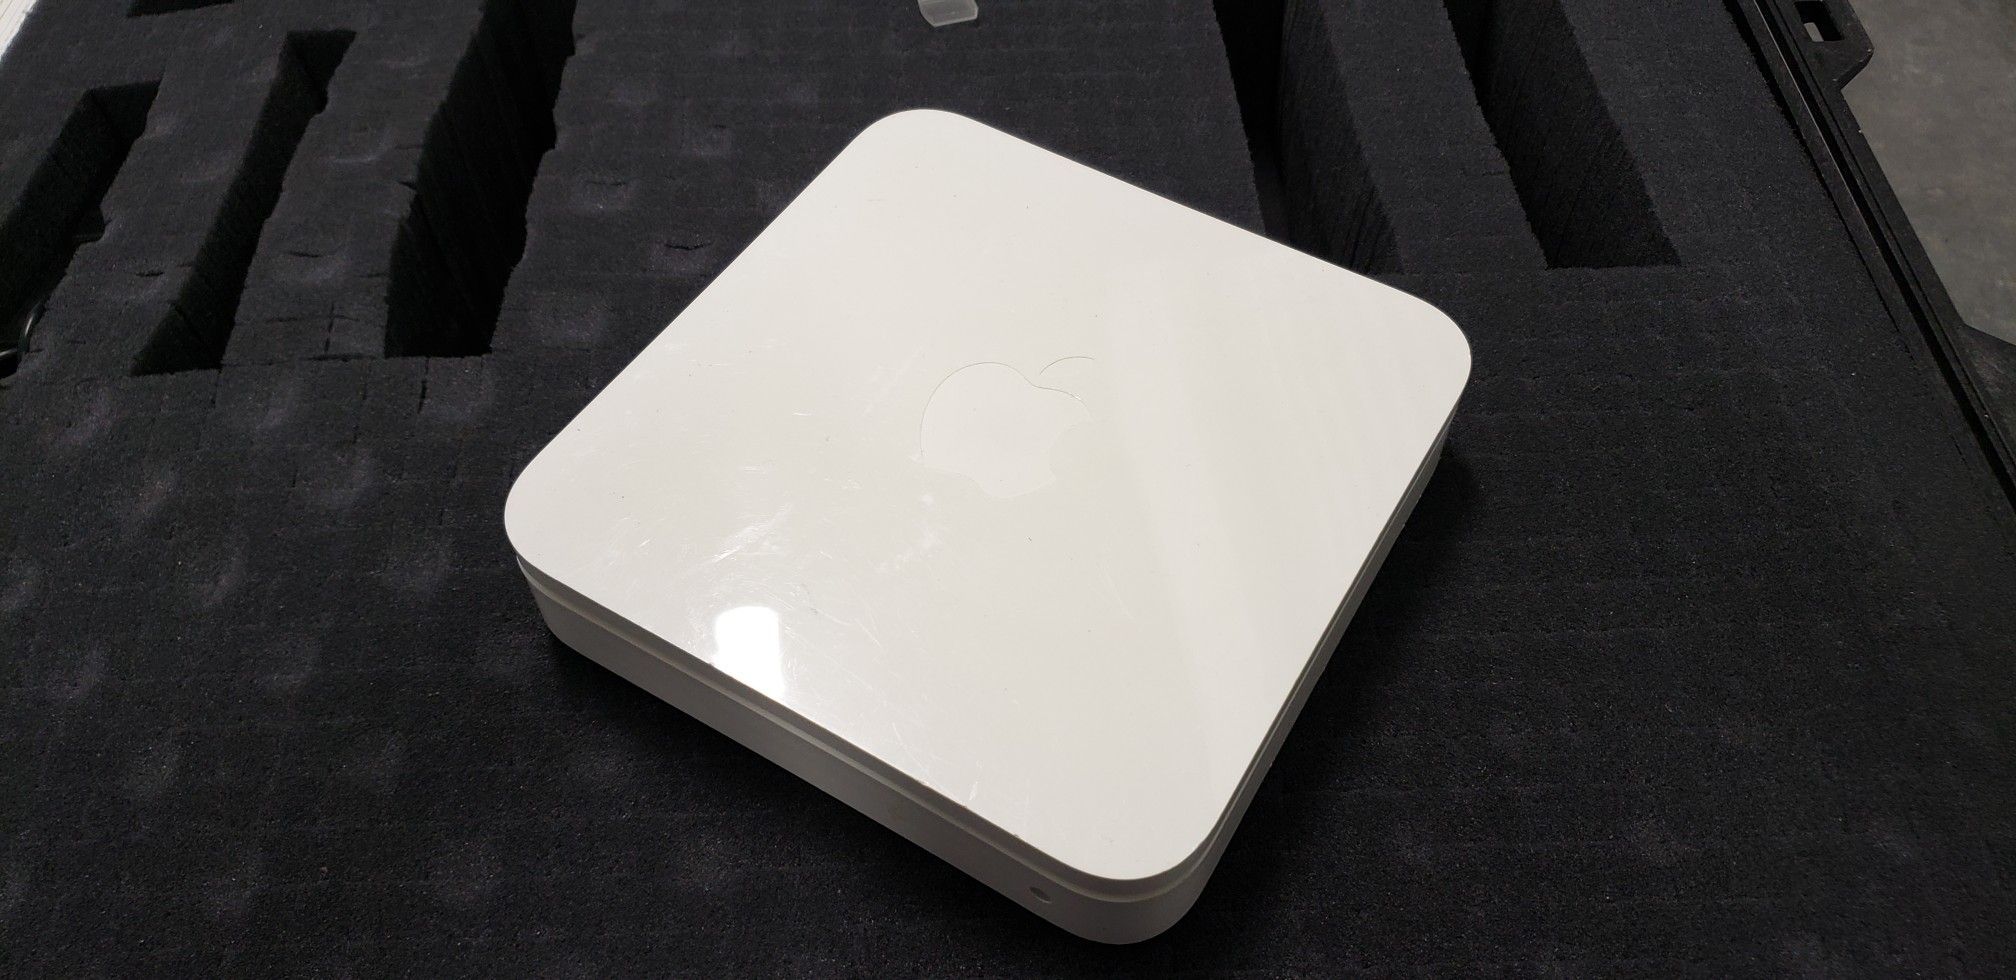 Apple Airport Extreme Base Station Router A1301